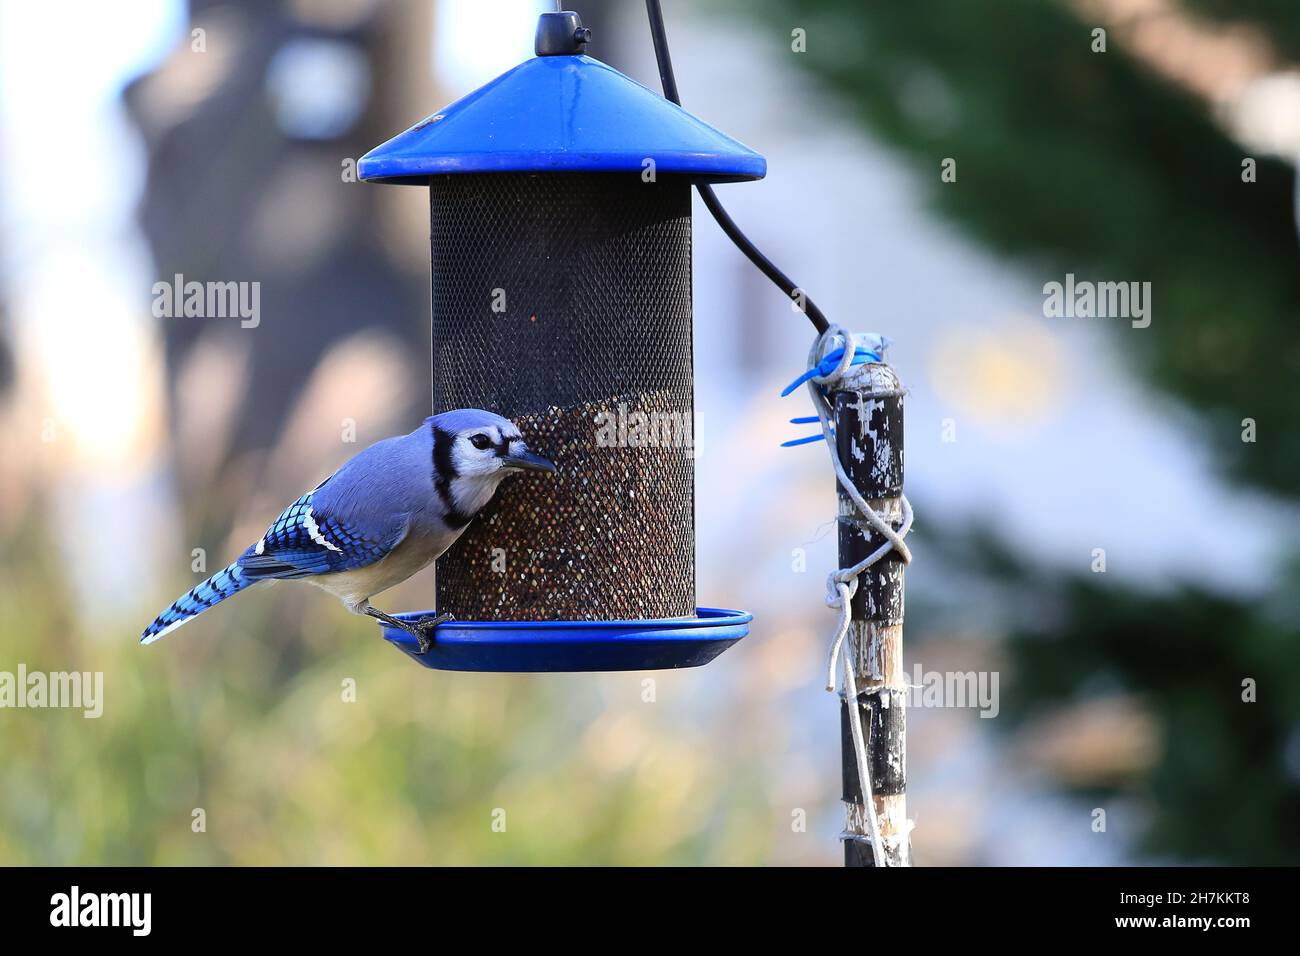 Blue jay long Island New York Banque D'Images